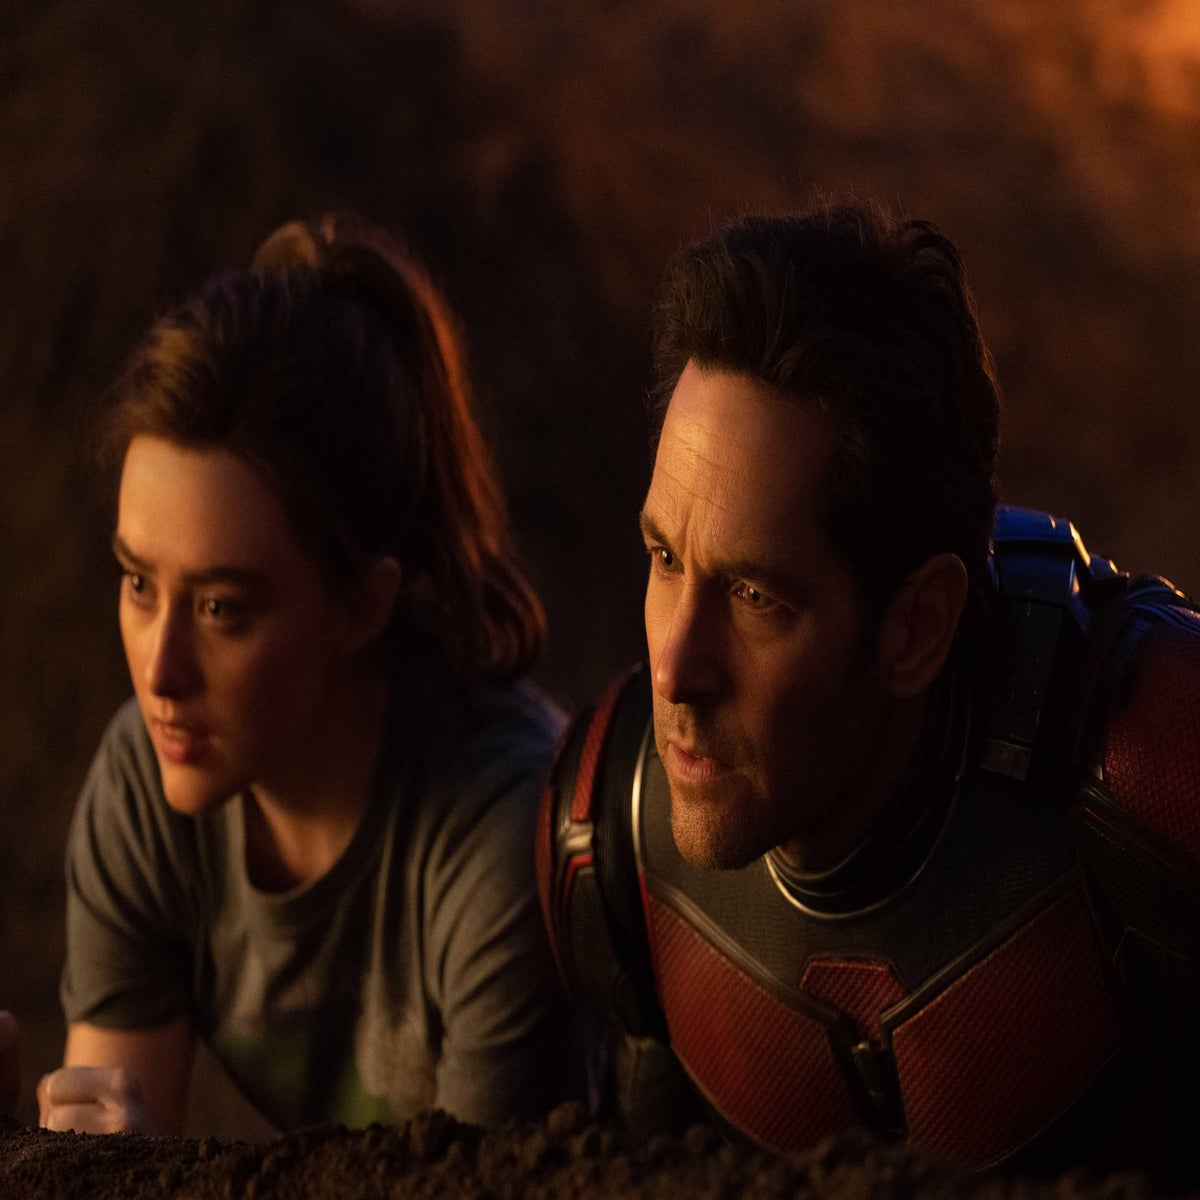 Ant-Man and the Wasp: Quantumania Early Rotten Tomatoes Score Is Out